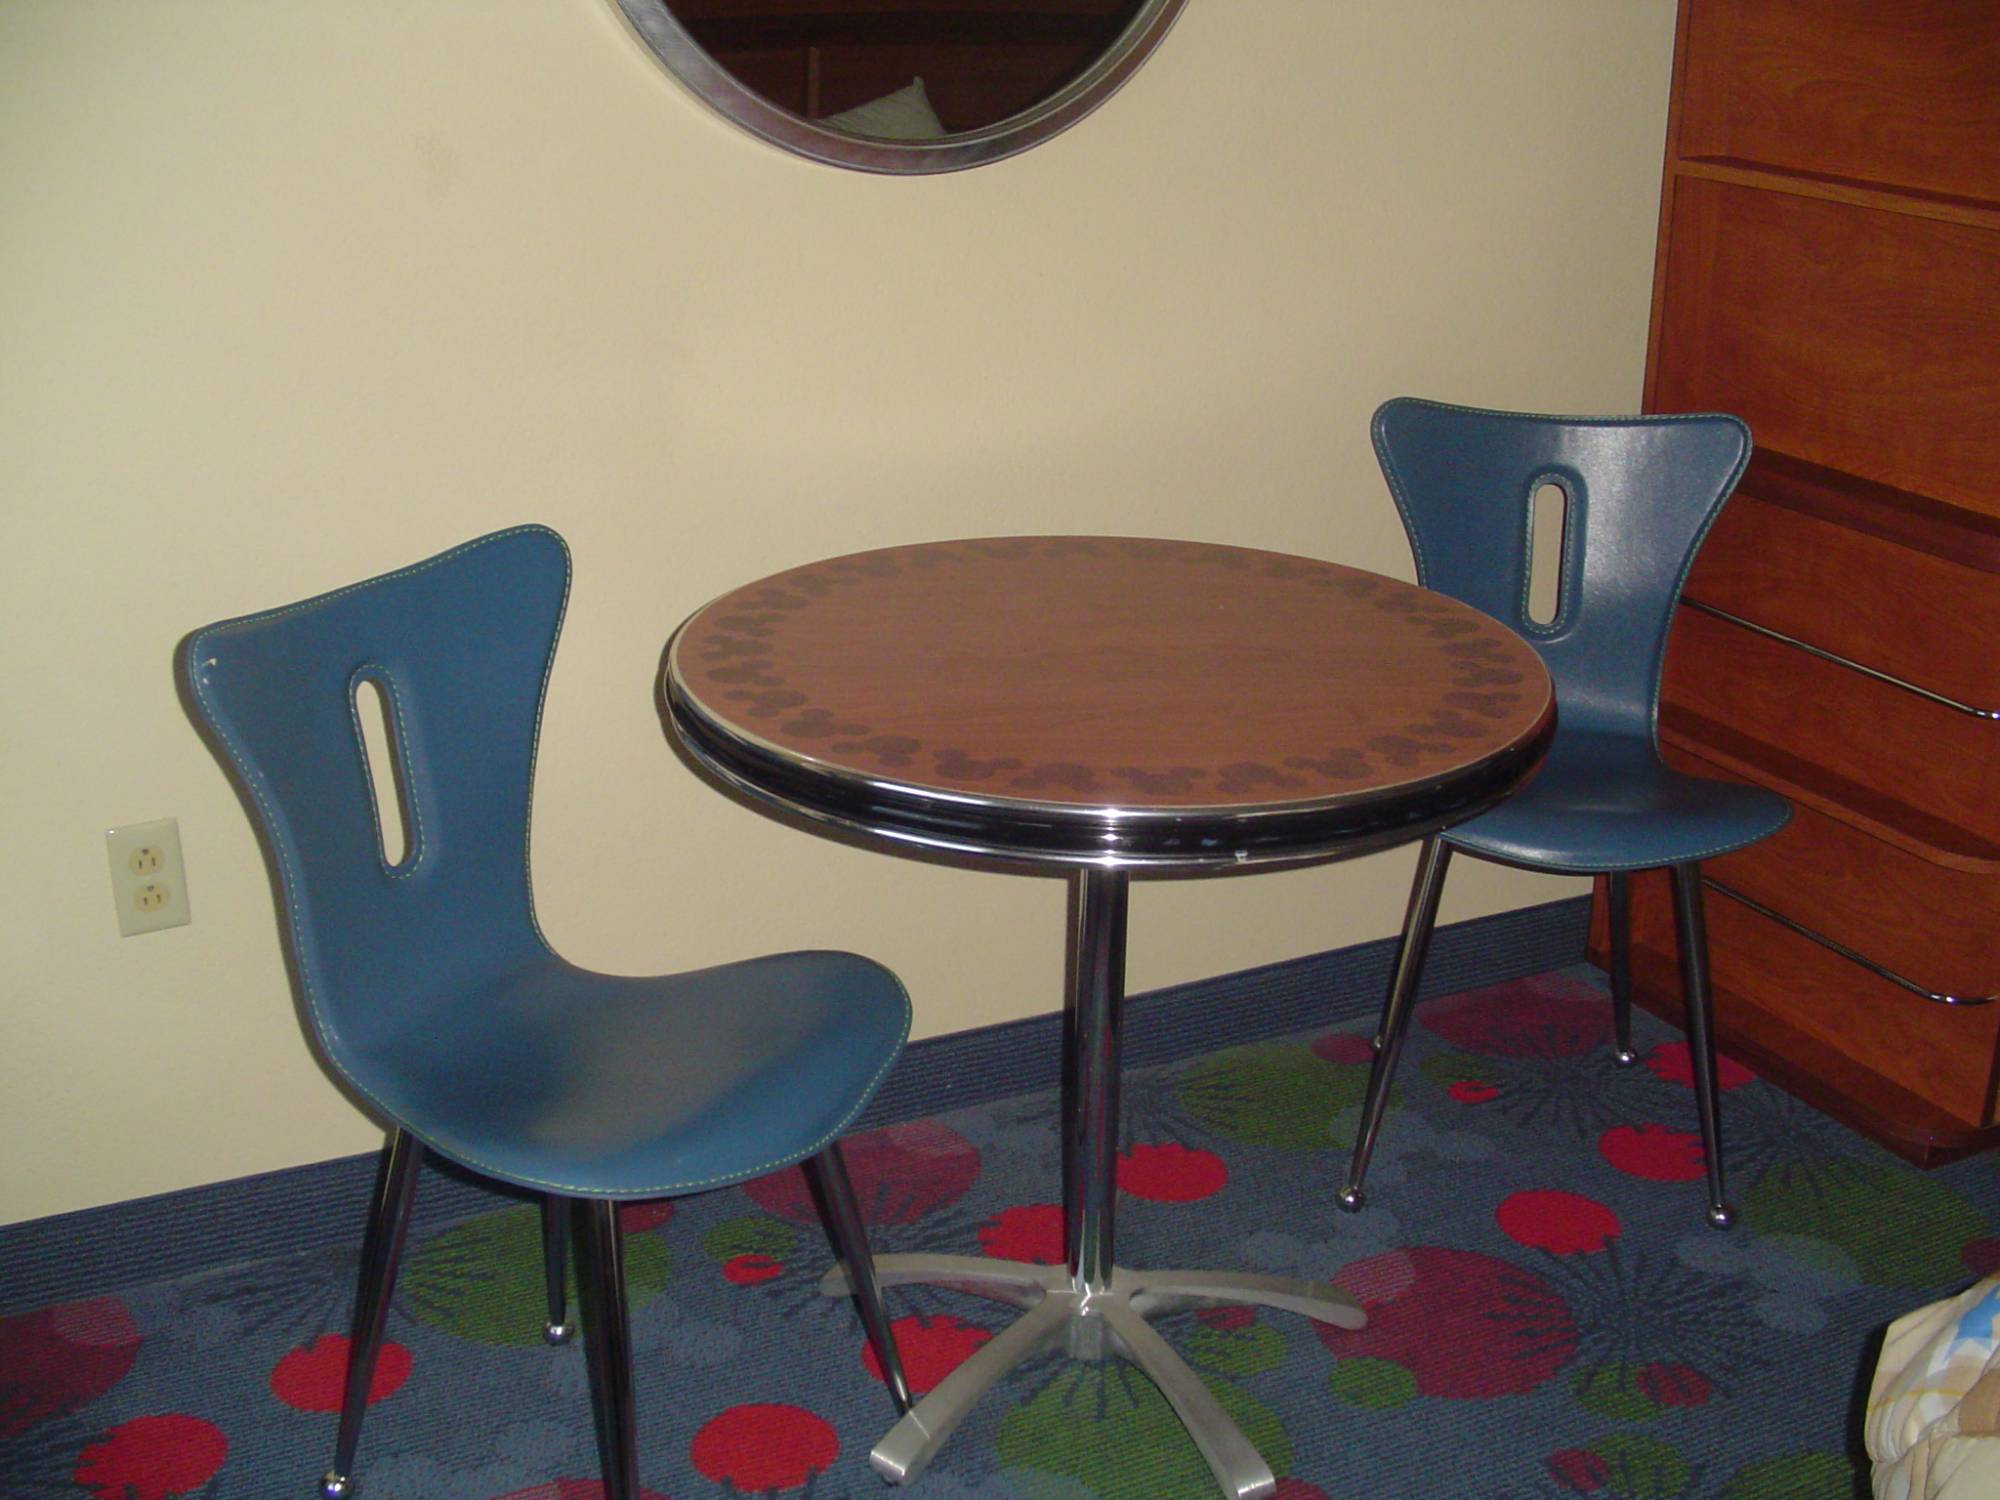 All Star Music - Calypso table and chairs